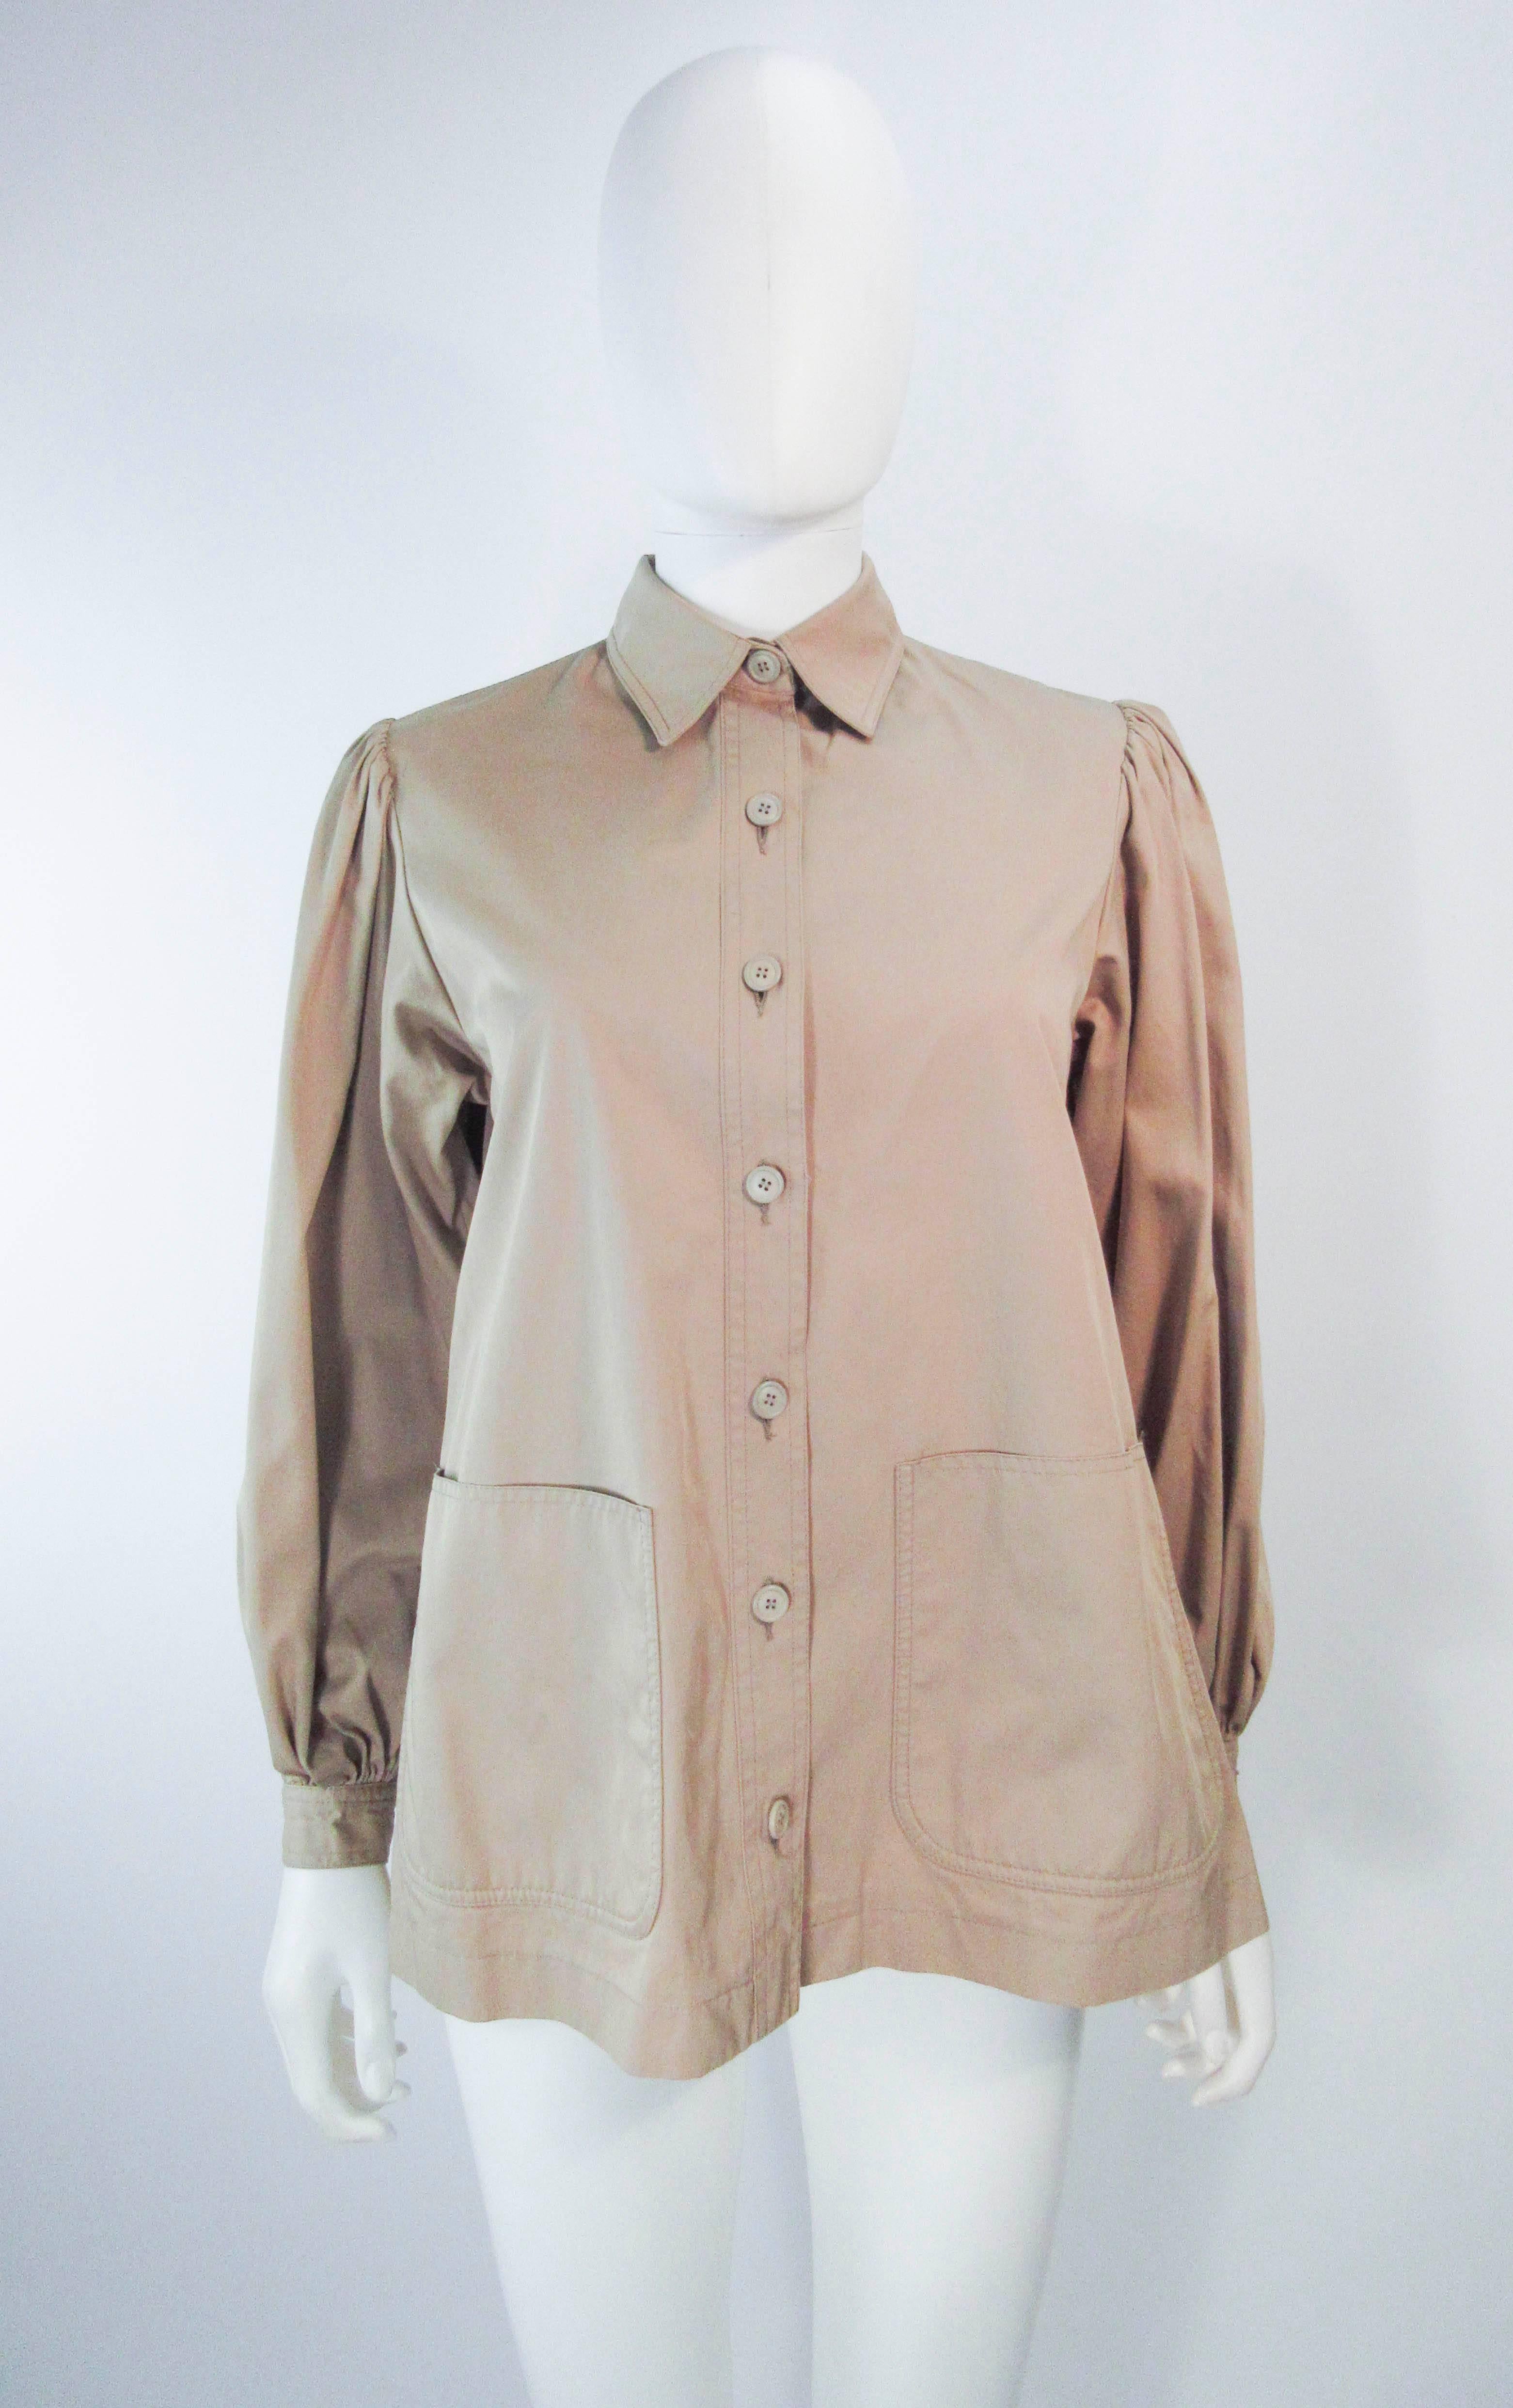 This Yves Saint Laurent top is composed of a khaki fabric & features a utility/safari style. There are center front button closures with front pockets. In great vintage condition there is some signs of wear due to age, the size and fabric content